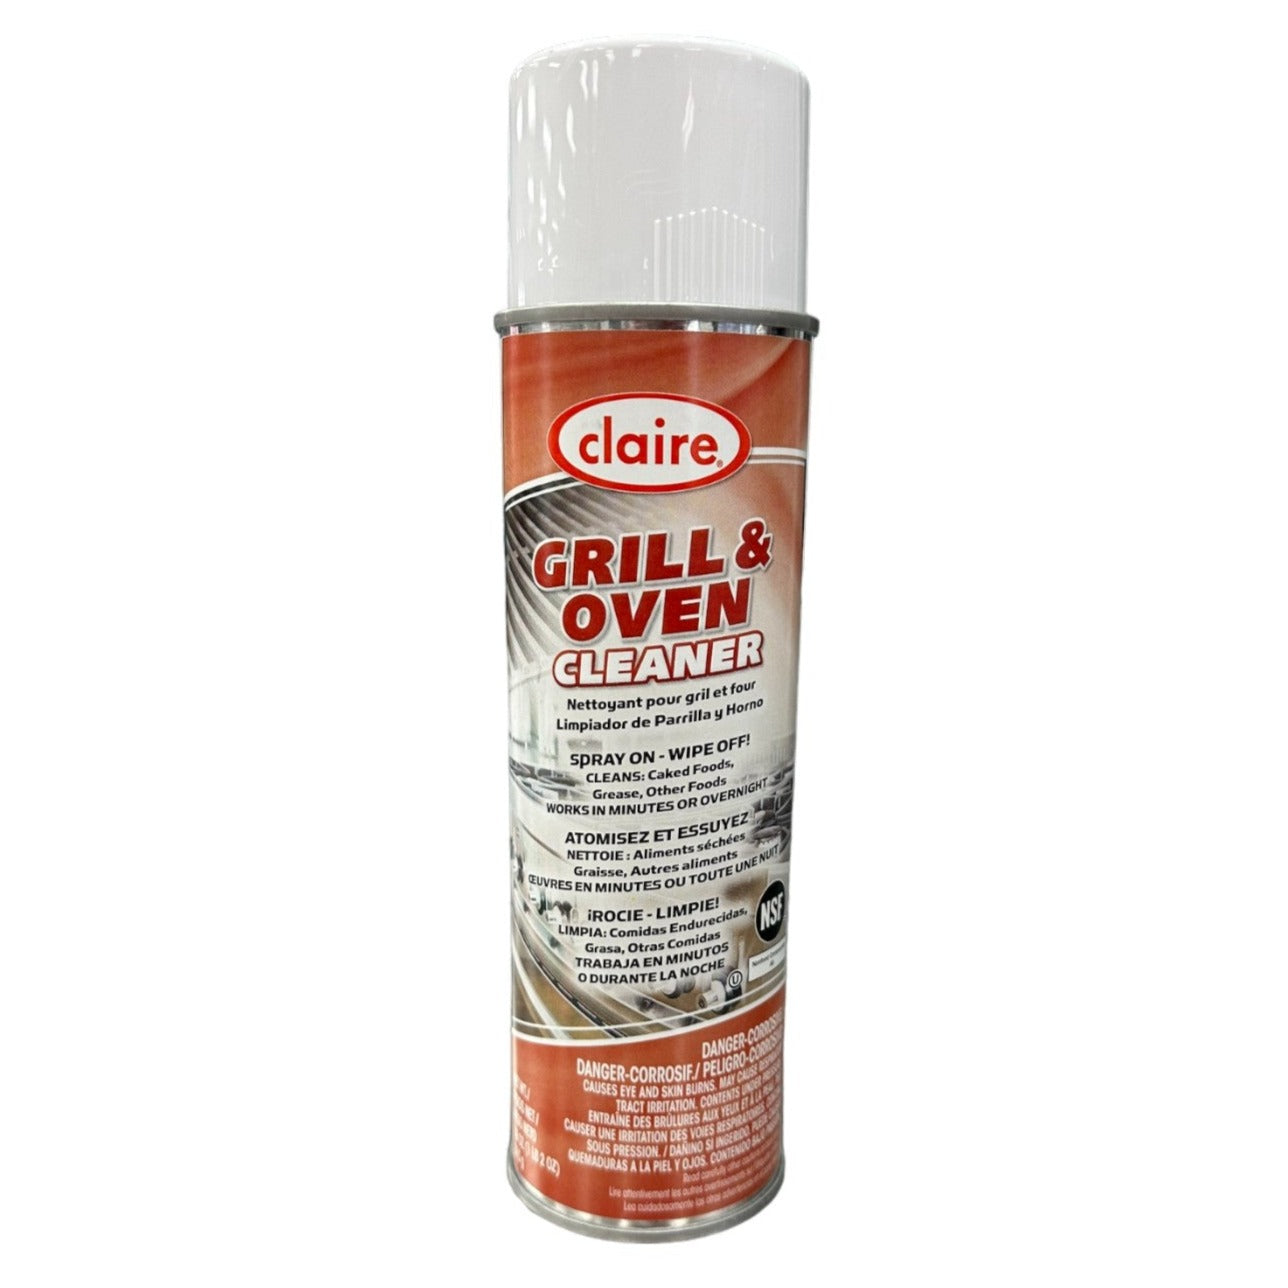 nettoyant-gril-four-grill-oven-cleaner-spray-claire